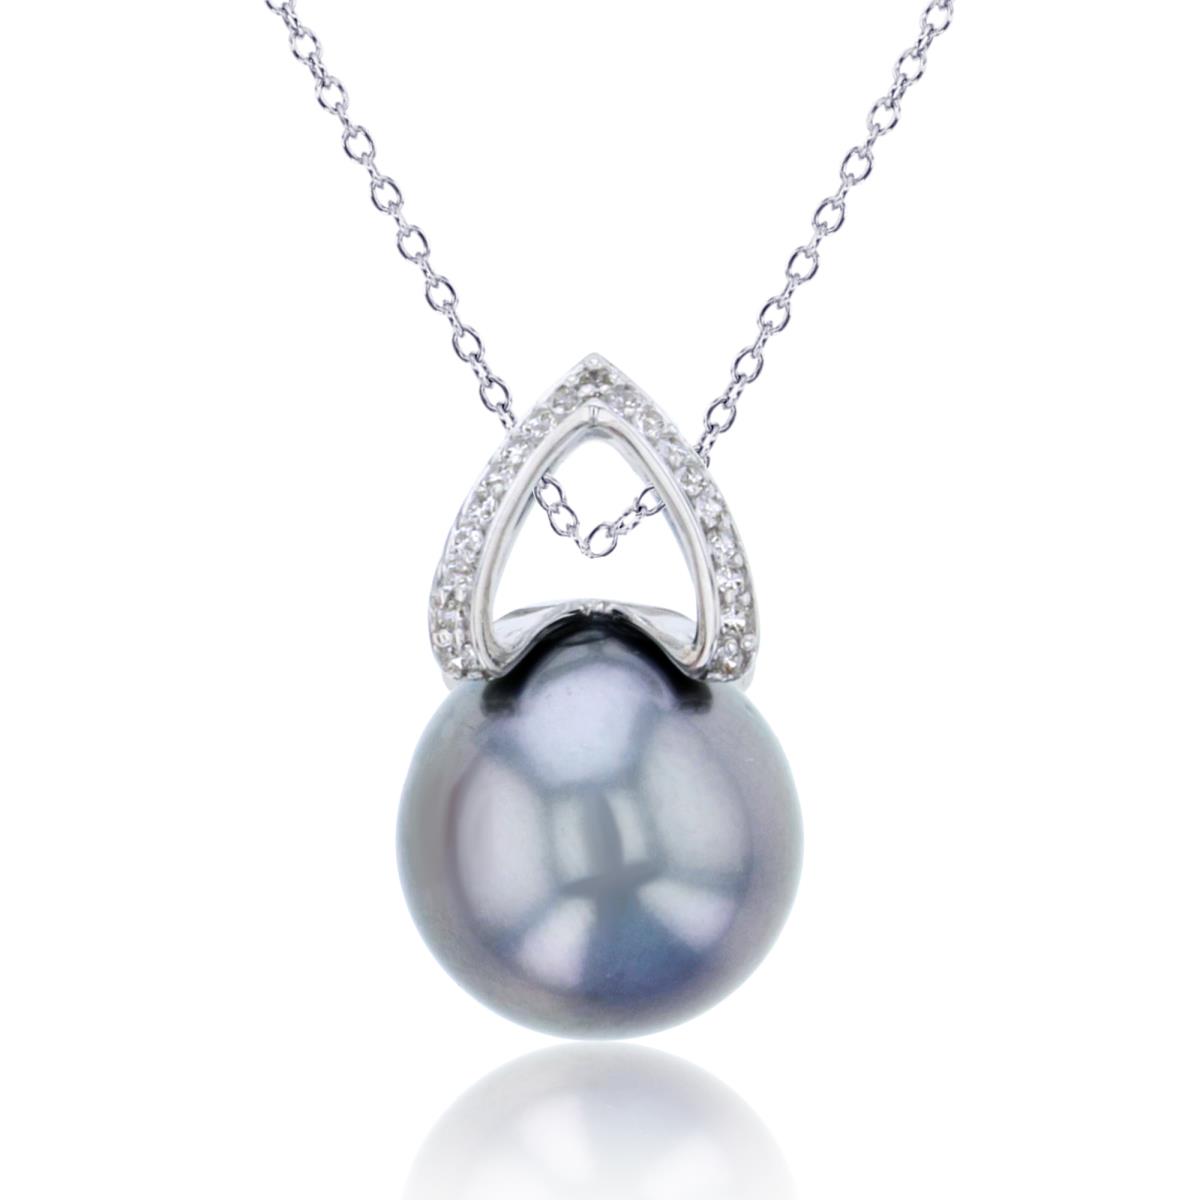 14K White Gold Rnd CZ & 12mm Rnd Tahitian Pearl 18"Necklace